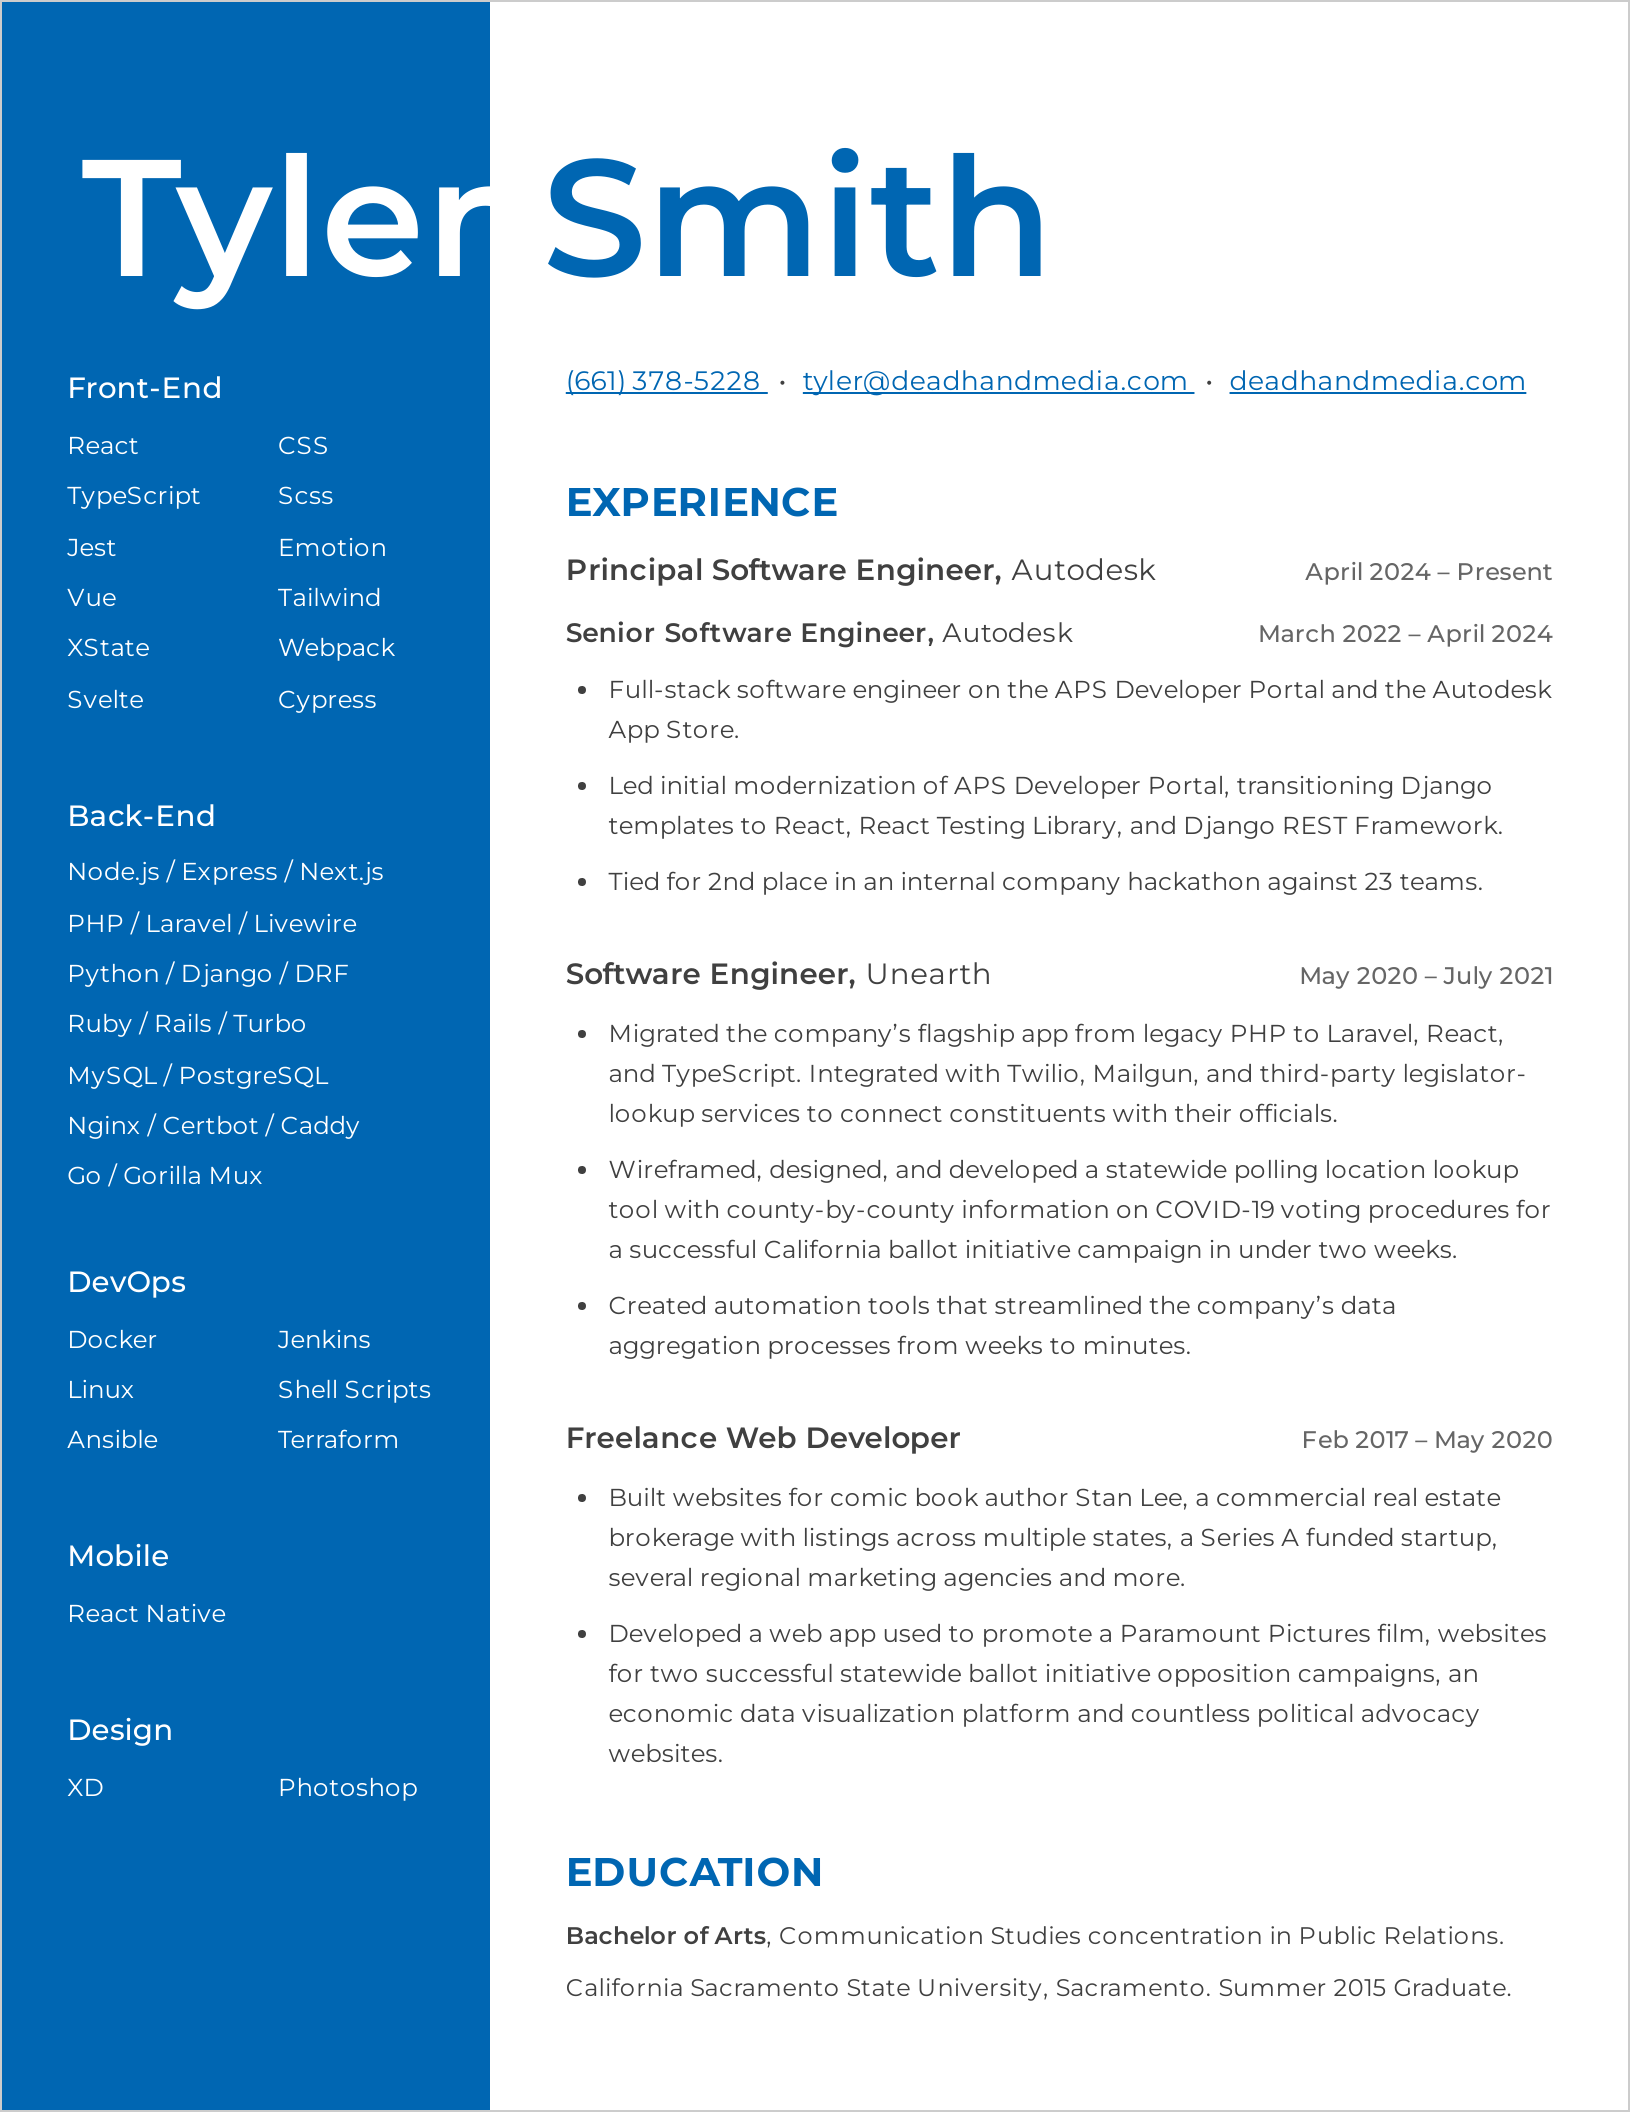 My current resume, generated at build time, being pulled in from the resume website